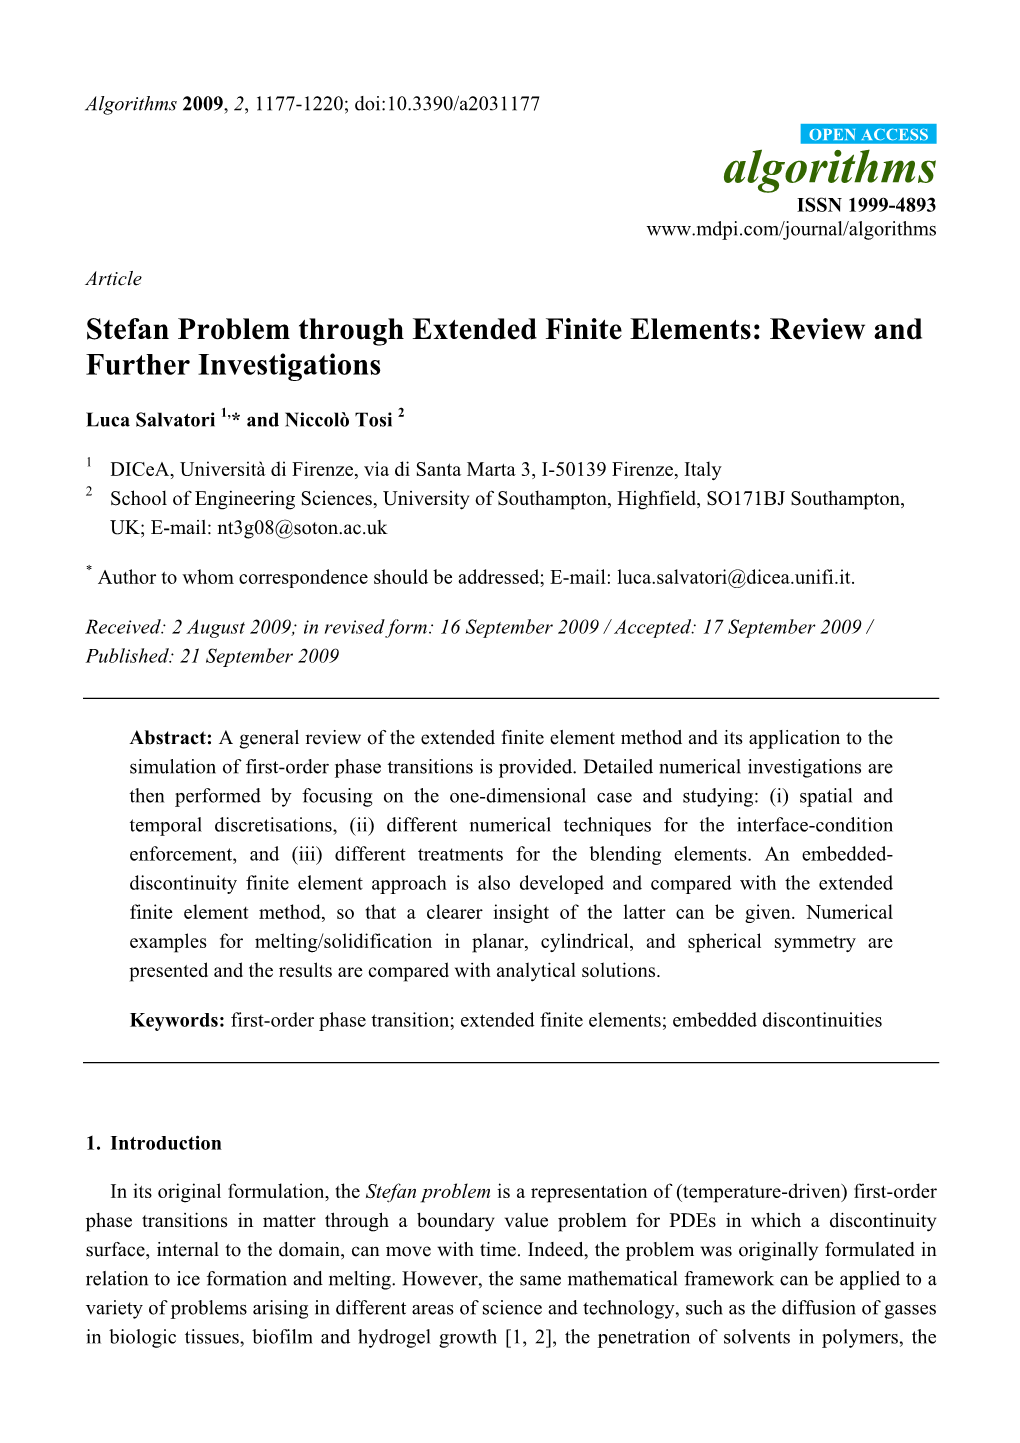 Stefan Problem Through Extended Finite Elements: Review and Further Investigations